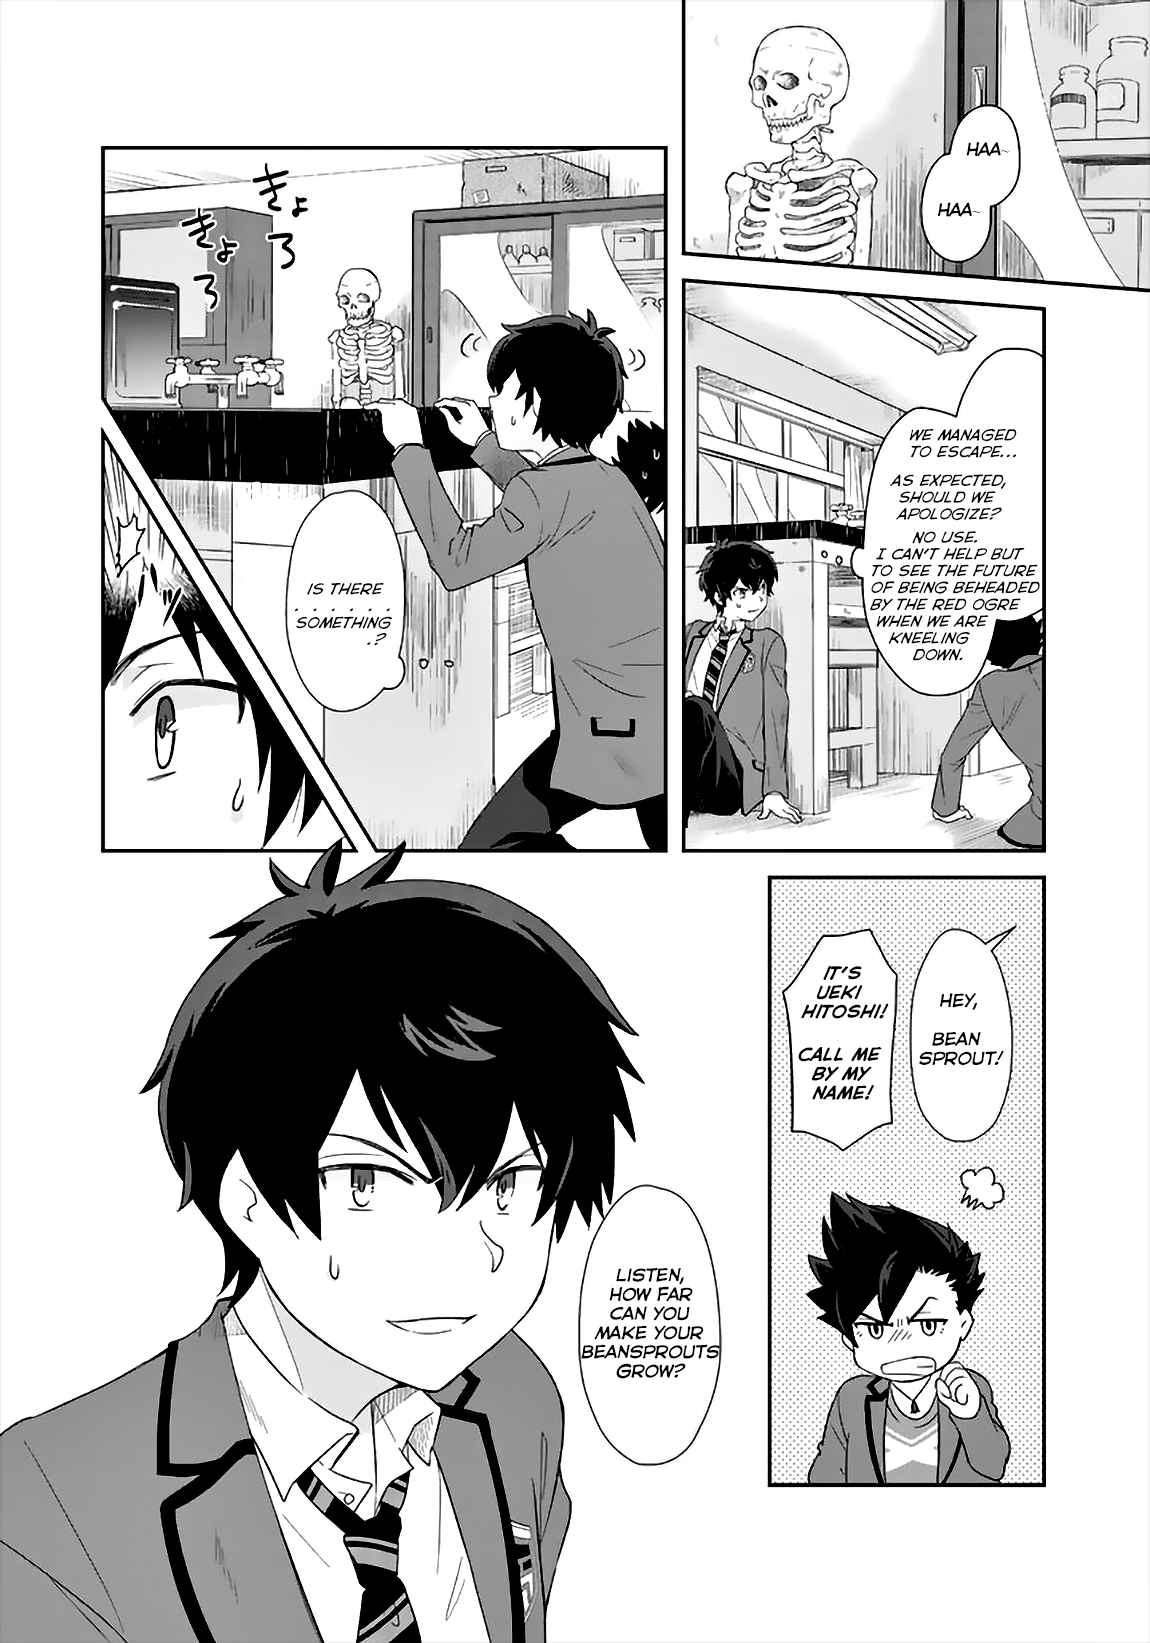 I, Who Acquired a Trash Skill 【Thermal Operator】, Became Unrivaled. Vol. 1 Ch. 2